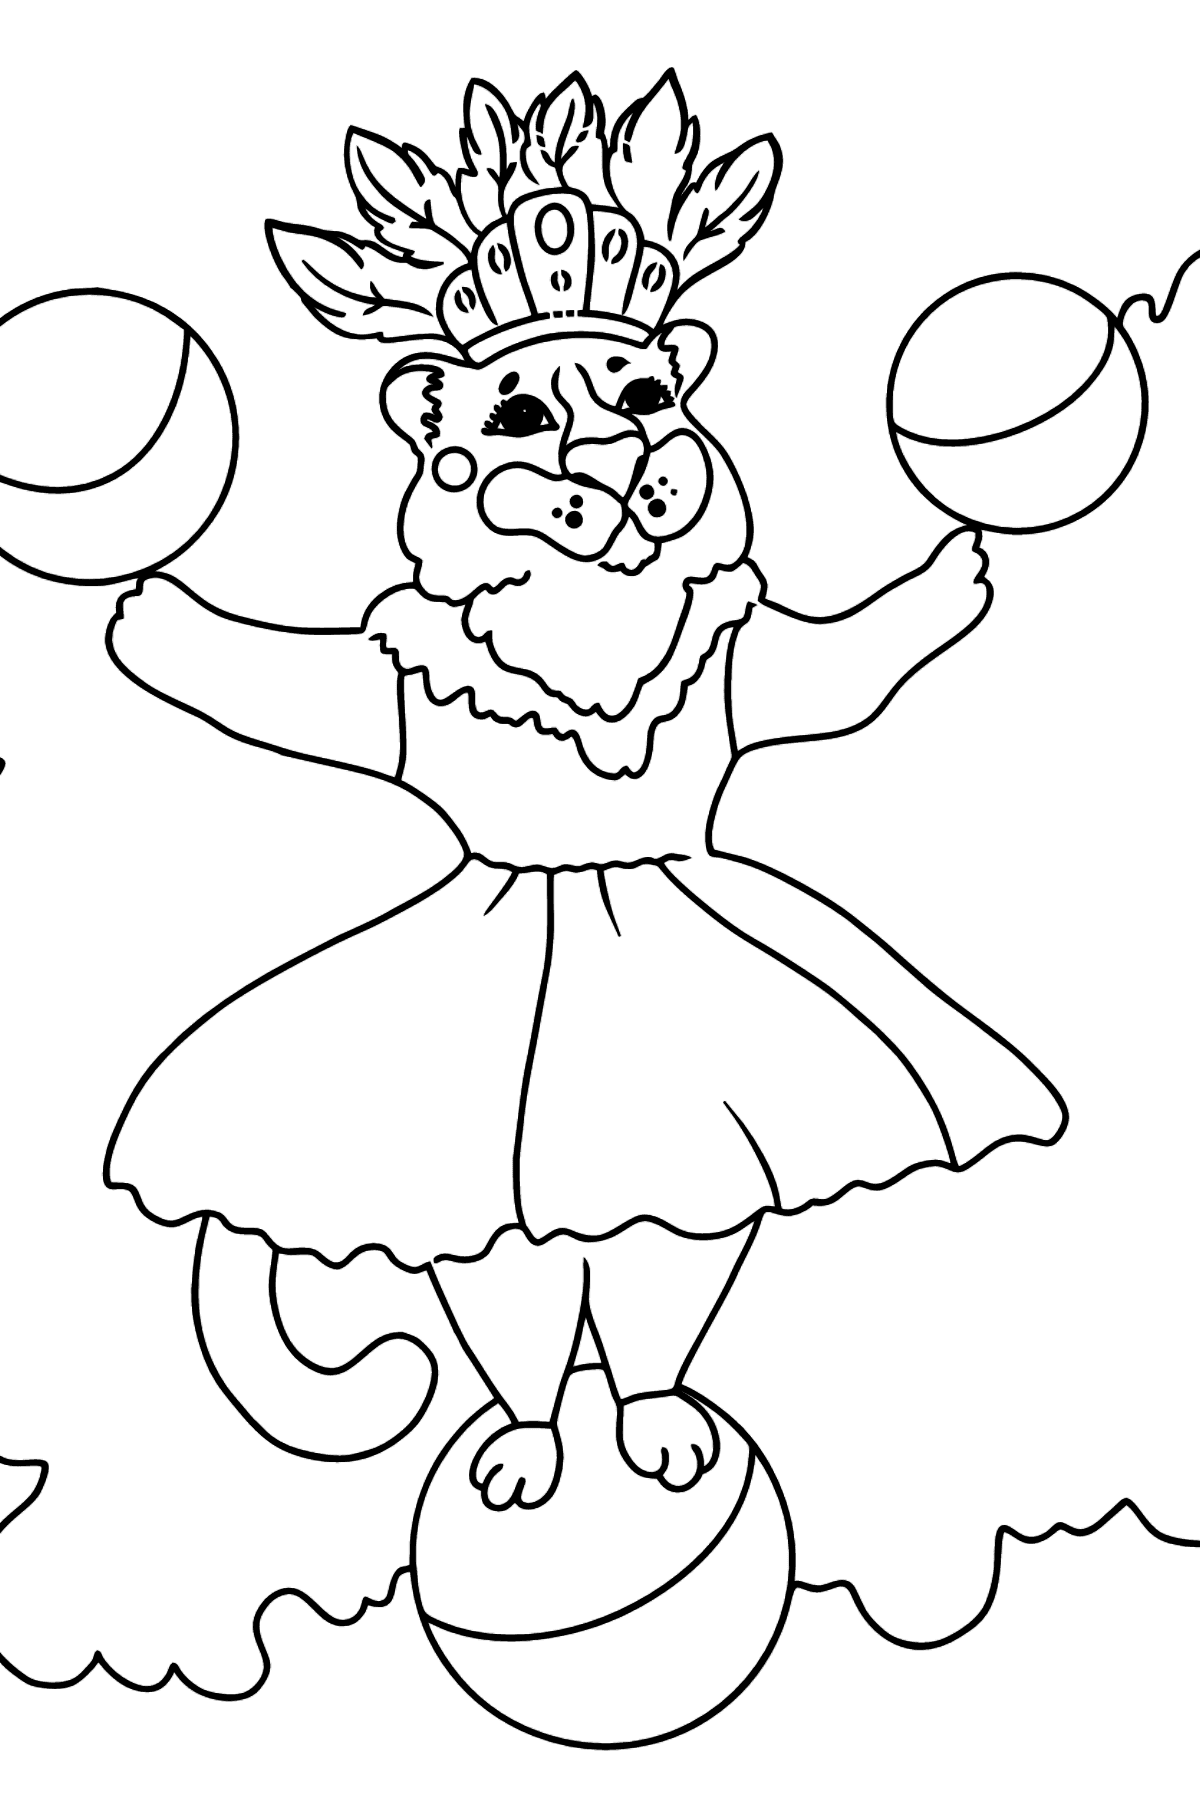 Coloring Page - A Tigress in a Circus with Balls - Coloring Pages for Kids